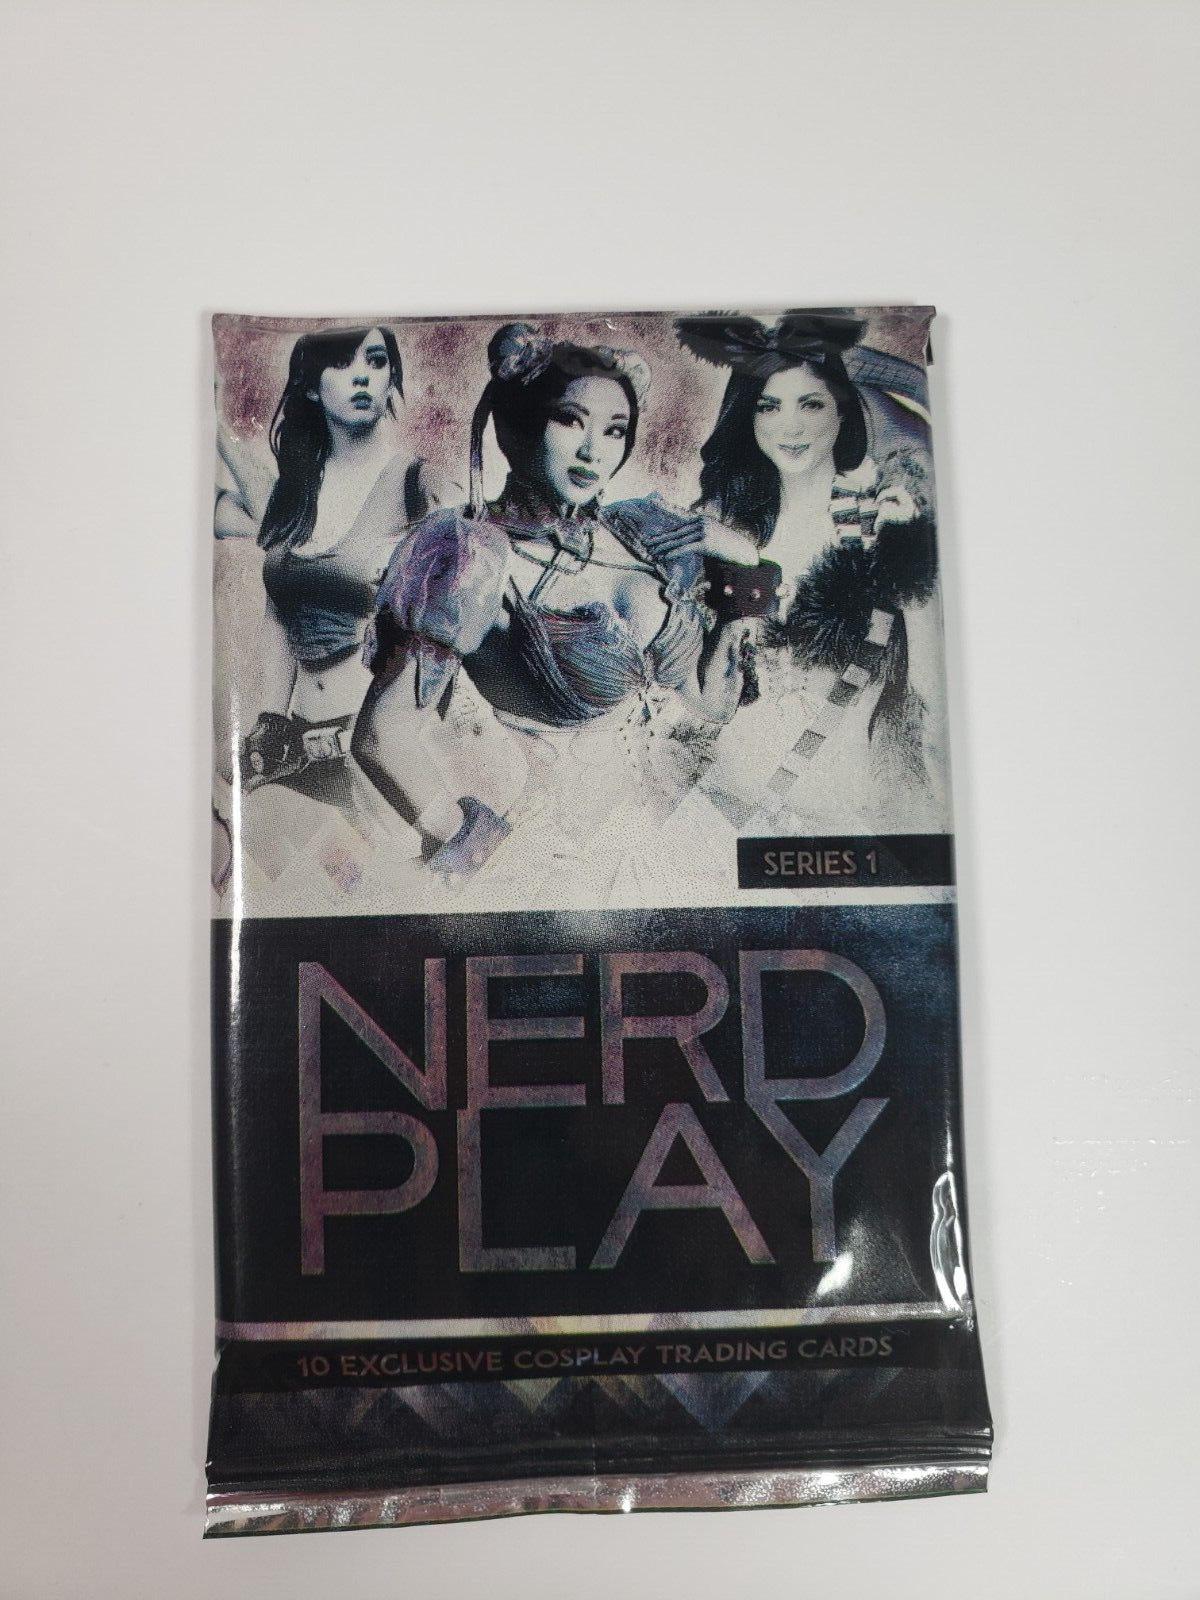 Nerd Play Series 1 Trading Cards Cosplay Nerd Block Exclusive Sealed One Pack